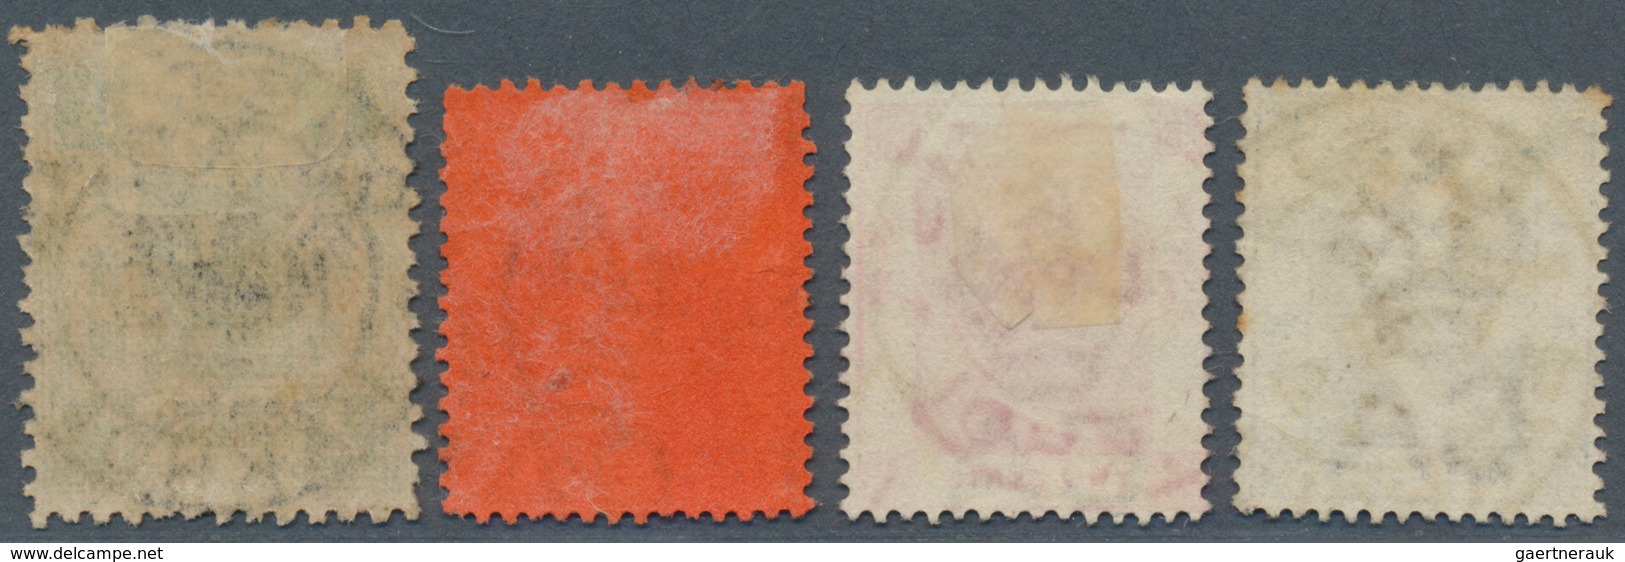 China: 1891/97, "CUSTOMS PAKHOI" Double Circle On Stamps Of Hong Kong Or 2 Cents/2 Ca., All Readable - 1912-1949 République